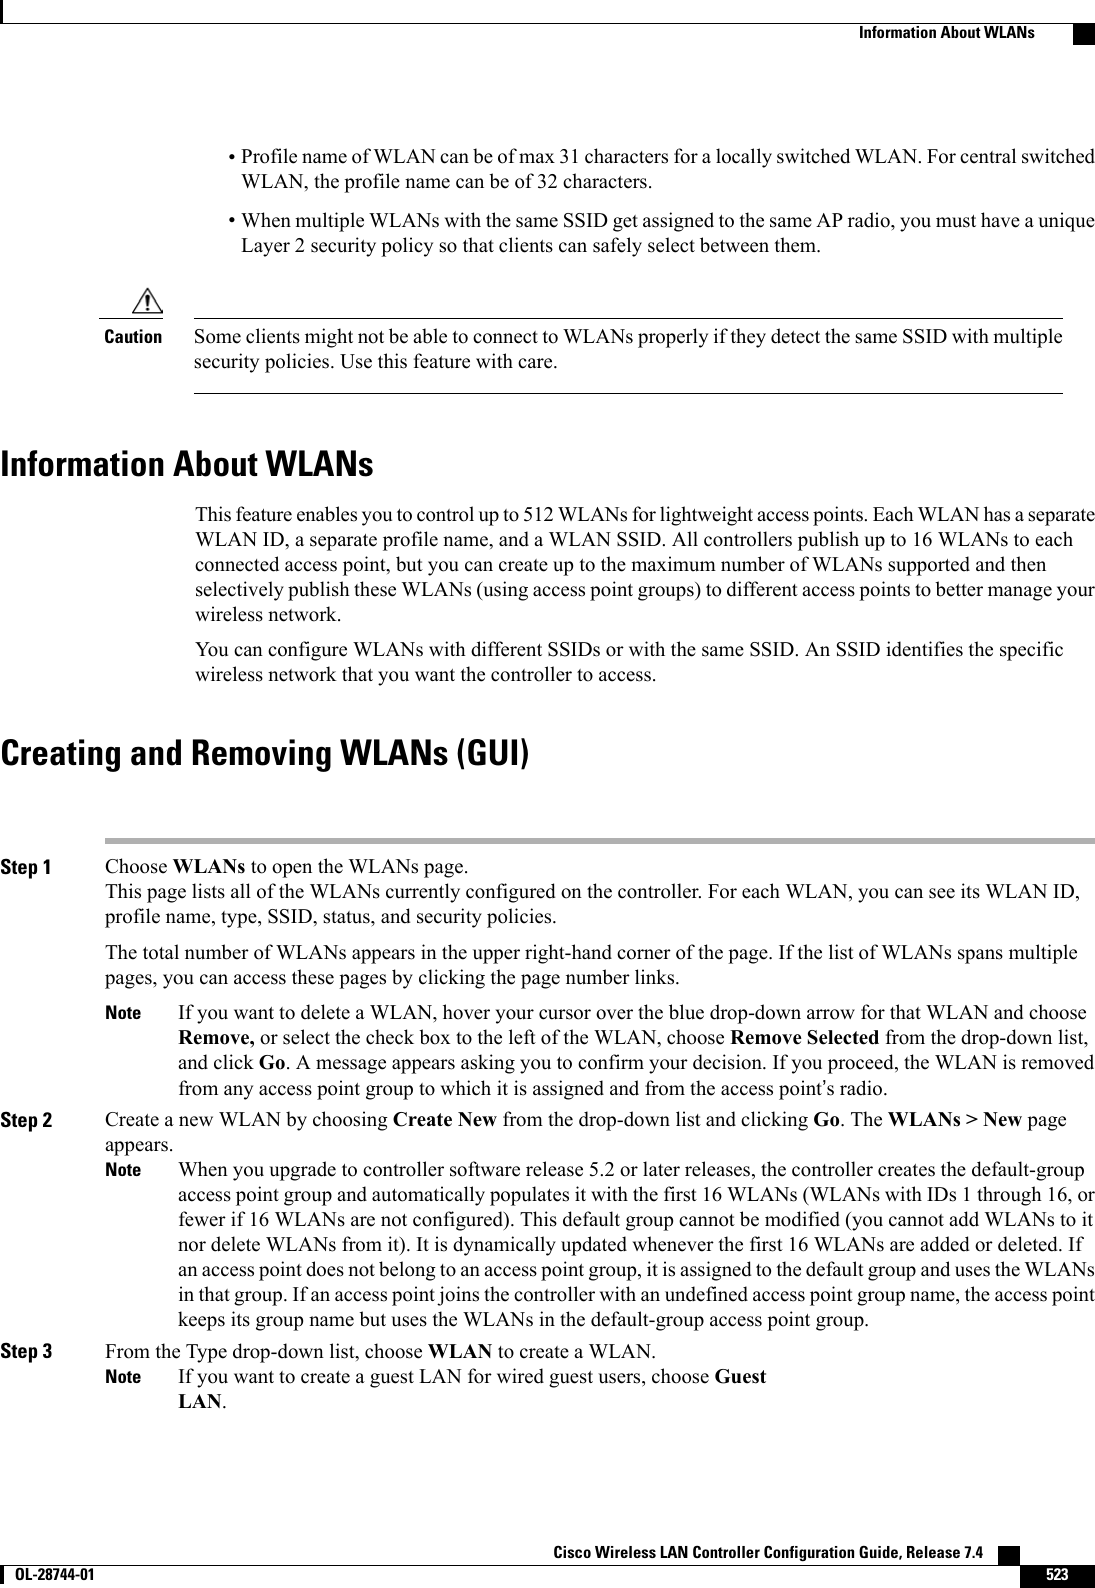 •Profile name of WLAN can be of max 31 characters for a locally switched WLAN. For central switchedWLAN, the profile name can be of 32 characters.•When multiple WLANs with the same SSID get assigned to the same AP radio, you must have a uniqueLayer 2 security policy so that clients can safely select between them.Some clients might not be able to connect to WLANs properly if they detect the same SSID with multiplesecurity policies. Use this feature with care.CautionInformation About WLANsThis feature enables you to control up to 512 WLANs for lightweight access points. Each WLAN has a separateWLAN ID, a separate profile name, and a WLAN SSID. All controllers publish up to 16 WLANs to eachconnected access point, but you can create up to the maximum number of WLANs supported and thenselectively publish these WLANs (using access point groups) to different access points to better manage yourwireless network.You can configure WLANs with different SSIDs or with the same SSID. An SSID identifies the specificwireless network that you want the controller to access.Creating and Removing WLANs (GUI)Step 1 Choose WLANs to open the WLANs page.This page lists all of the WLANs currently configured on the controller. For each WLAN, you can see its WLAN ID,profile name, type, SSID, status, and security policies.The total number of WLANs appears in the upper right-hand corner of the page. If the list of WLANs spans multiplepages, you can access these pages by clicking the page number links.If you want to delete a WLAN, hover your cursor over the blue drop-down arrow for that WLAN and chooseRemove, or select the check box to the left of the WLAN, choose Remove Selected from the drop-down list,and click Go. A message appears asking you to confirm your decision. If you proceed, the WLAN is removedfrom any access point group to which it is assigned and from the access point’s radio.NoteStep 2 Create a new WLAN by choosing Create New from the drop-down list and clicking Go. The WLANs &gt; New pageappears.When you upgrade to controller software release 5.2 or later releases, the controller creates the default-groupaccess point group and automatically populates it with the first 16 WLANs (WLANs with IDs 1 through 16, orfewer if 16 WLANs are not configured). This default group cannot be modified (you cannot add WLANs to itnor delete WLANs from it). It is dynamically updated whenever the first 16 WLANs are added or deleted. Ifan access point does not belong to an access point group, it is assigned to the default group and uses the WLANsin that group. If an access point joins the controller with an undefined access point group name, the access pointkeeps its group name but uses the WLANs in the default-group access point group.NoteStep 3 From the Type drop-down list, choose WLAN to create a WLAN.If you want to create a guest LAN for wired guest users, choose GuestLAN.NoteCisco Wireless LAN Controller Configuration Guide, Release 7.4       OL-28744-01 523Information About WLANs